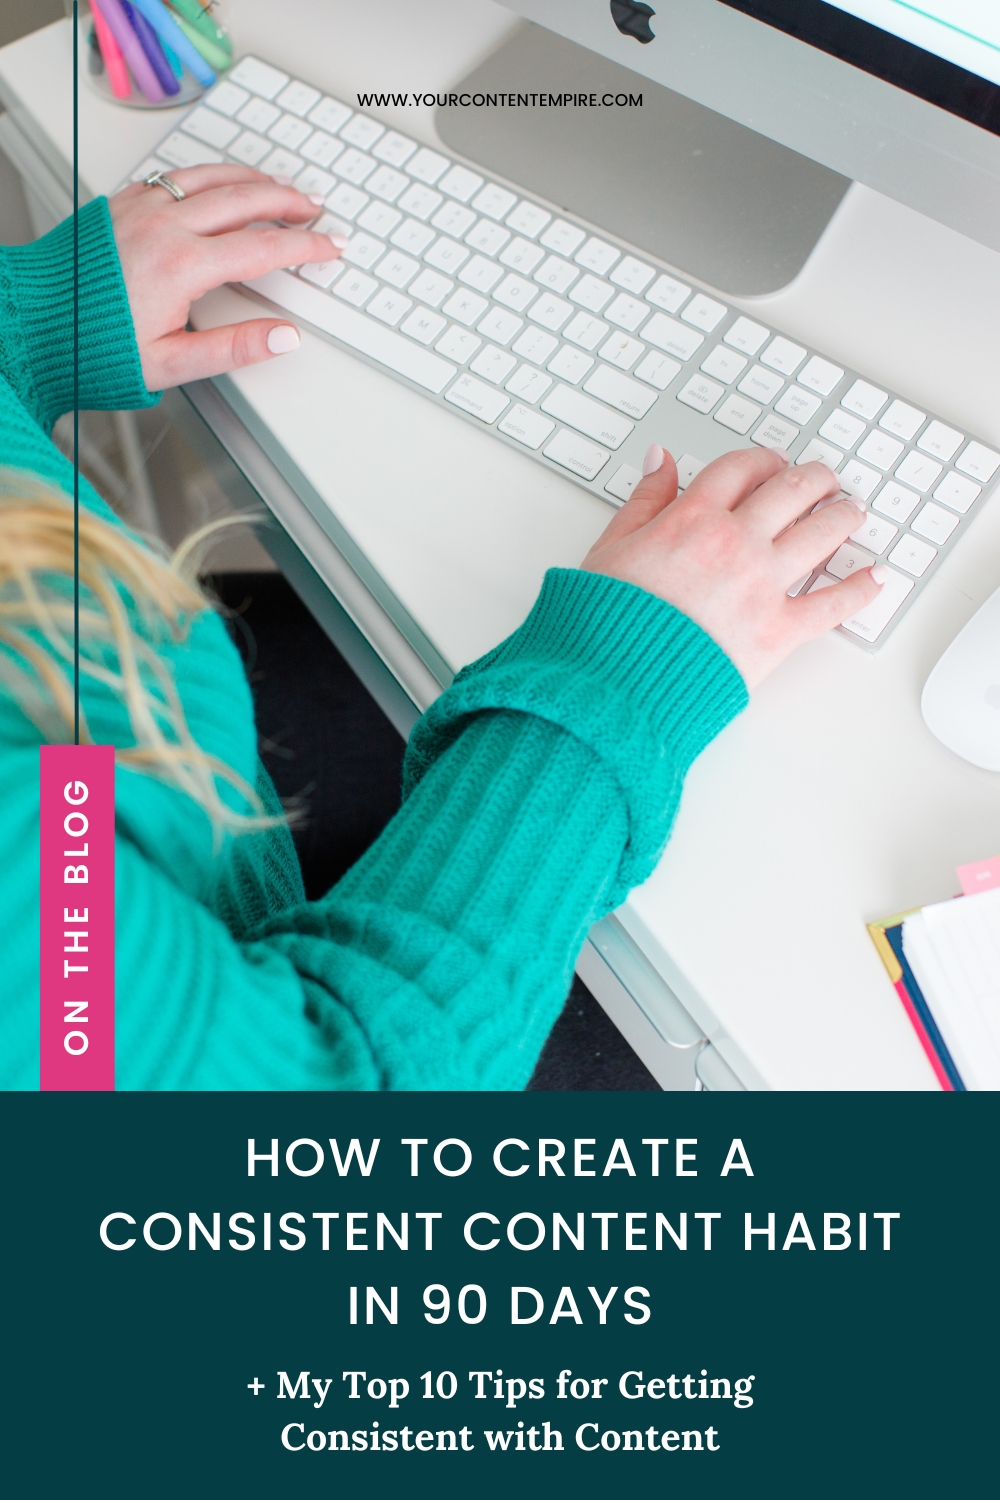 How to Create a Consistent Content Habit in 90 Days by Your Content Empire